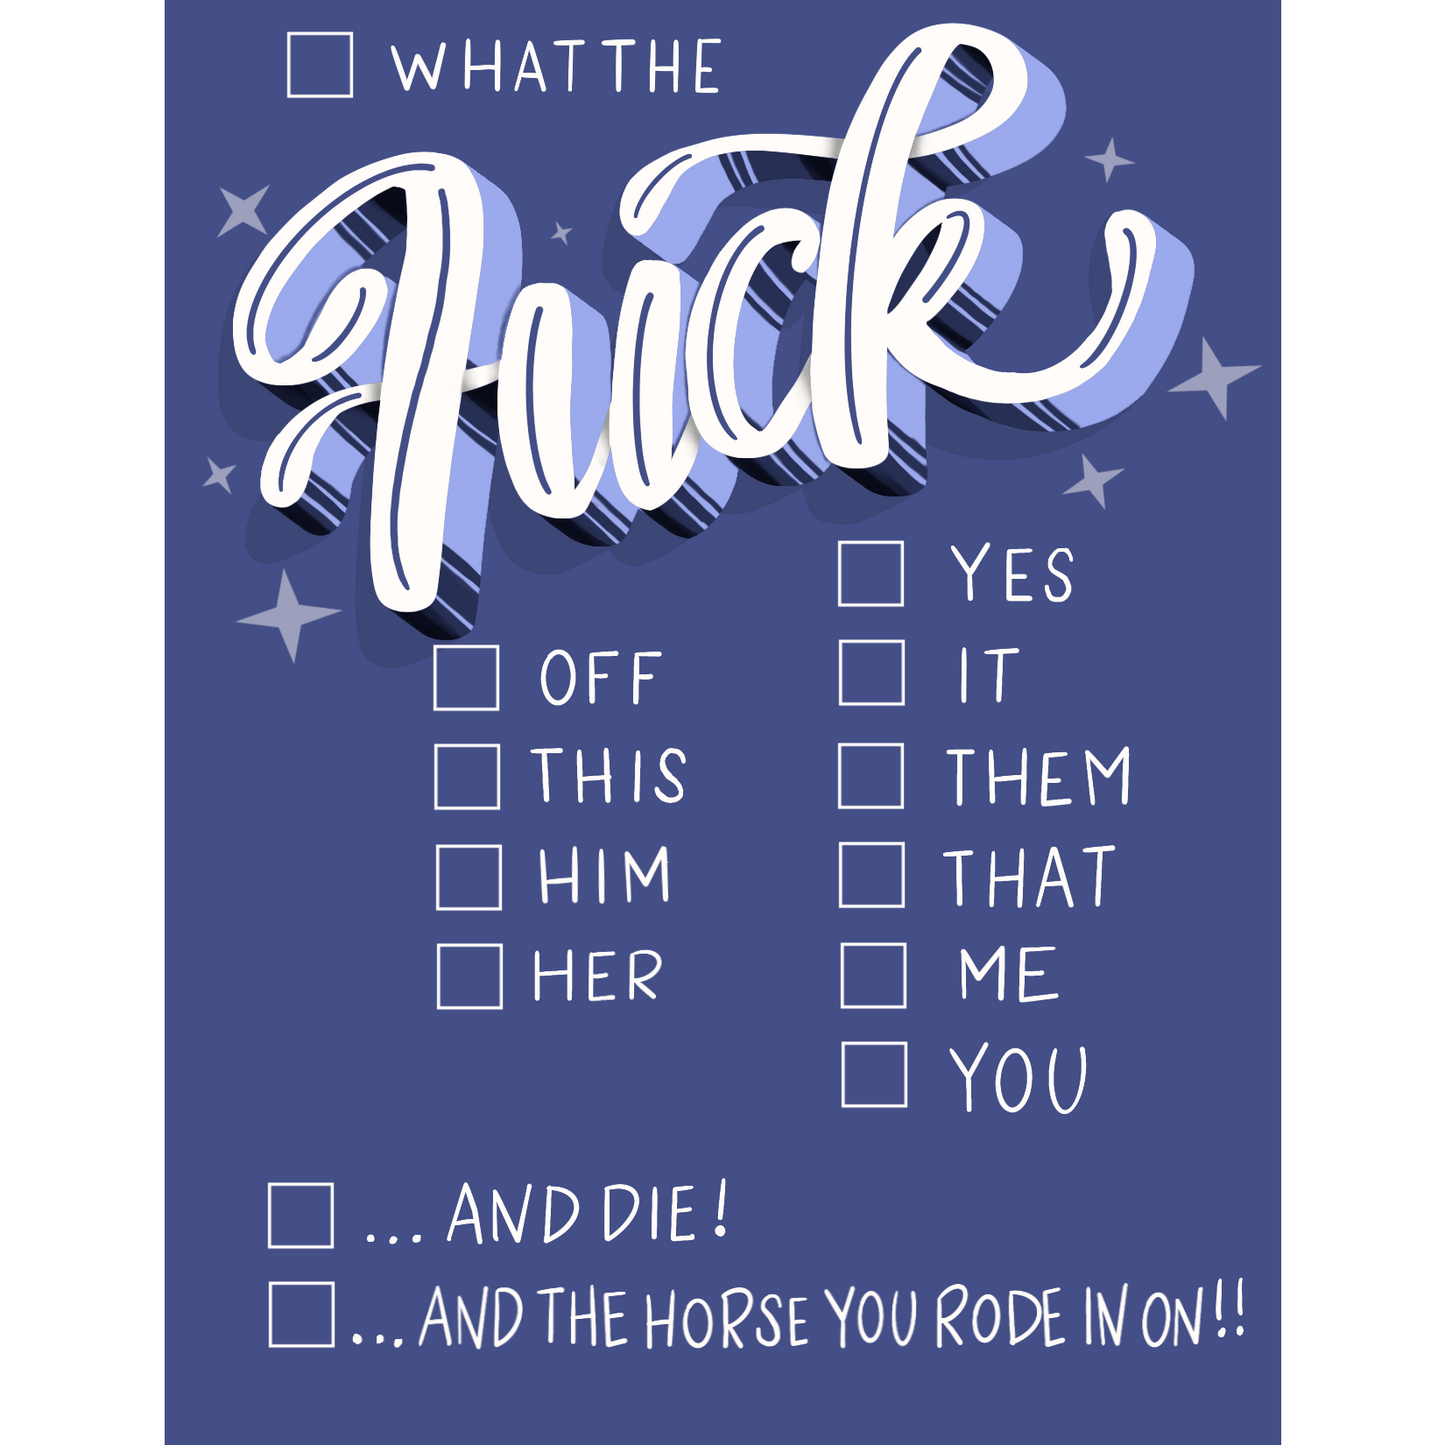 Check Your F*ck - Empathy Card